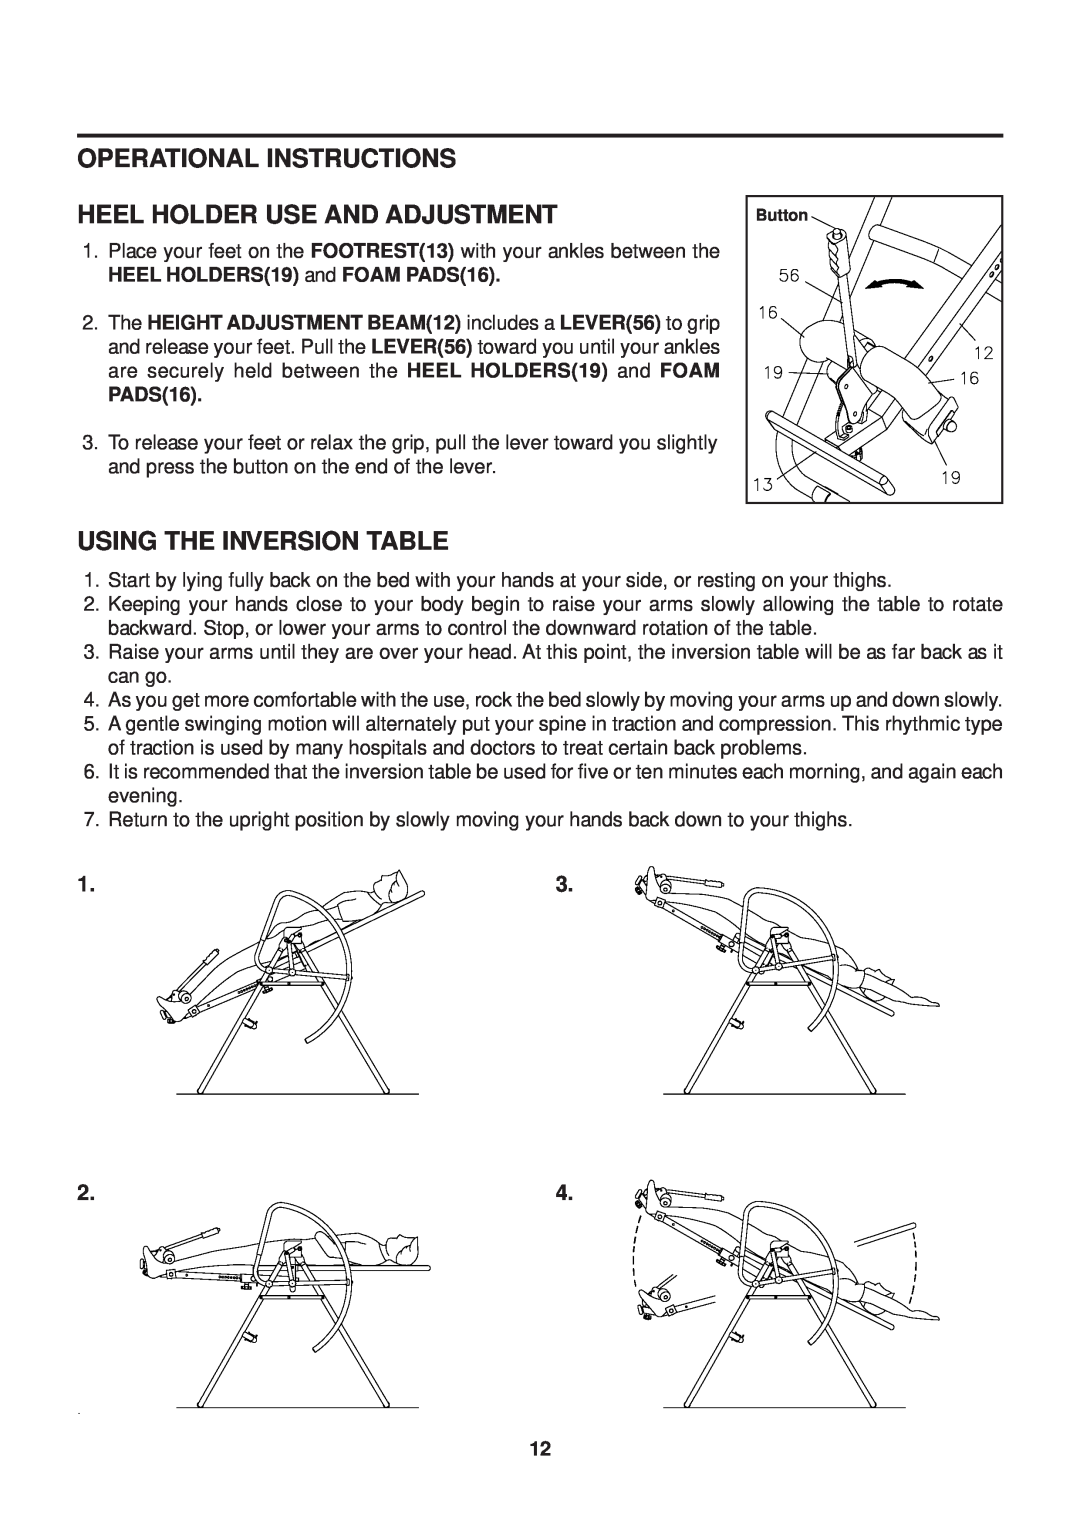 Stamina Products 55-1539A Operational Instructions Heel Holder Use And Adjustment, Using The Inversion Table, PADS16 